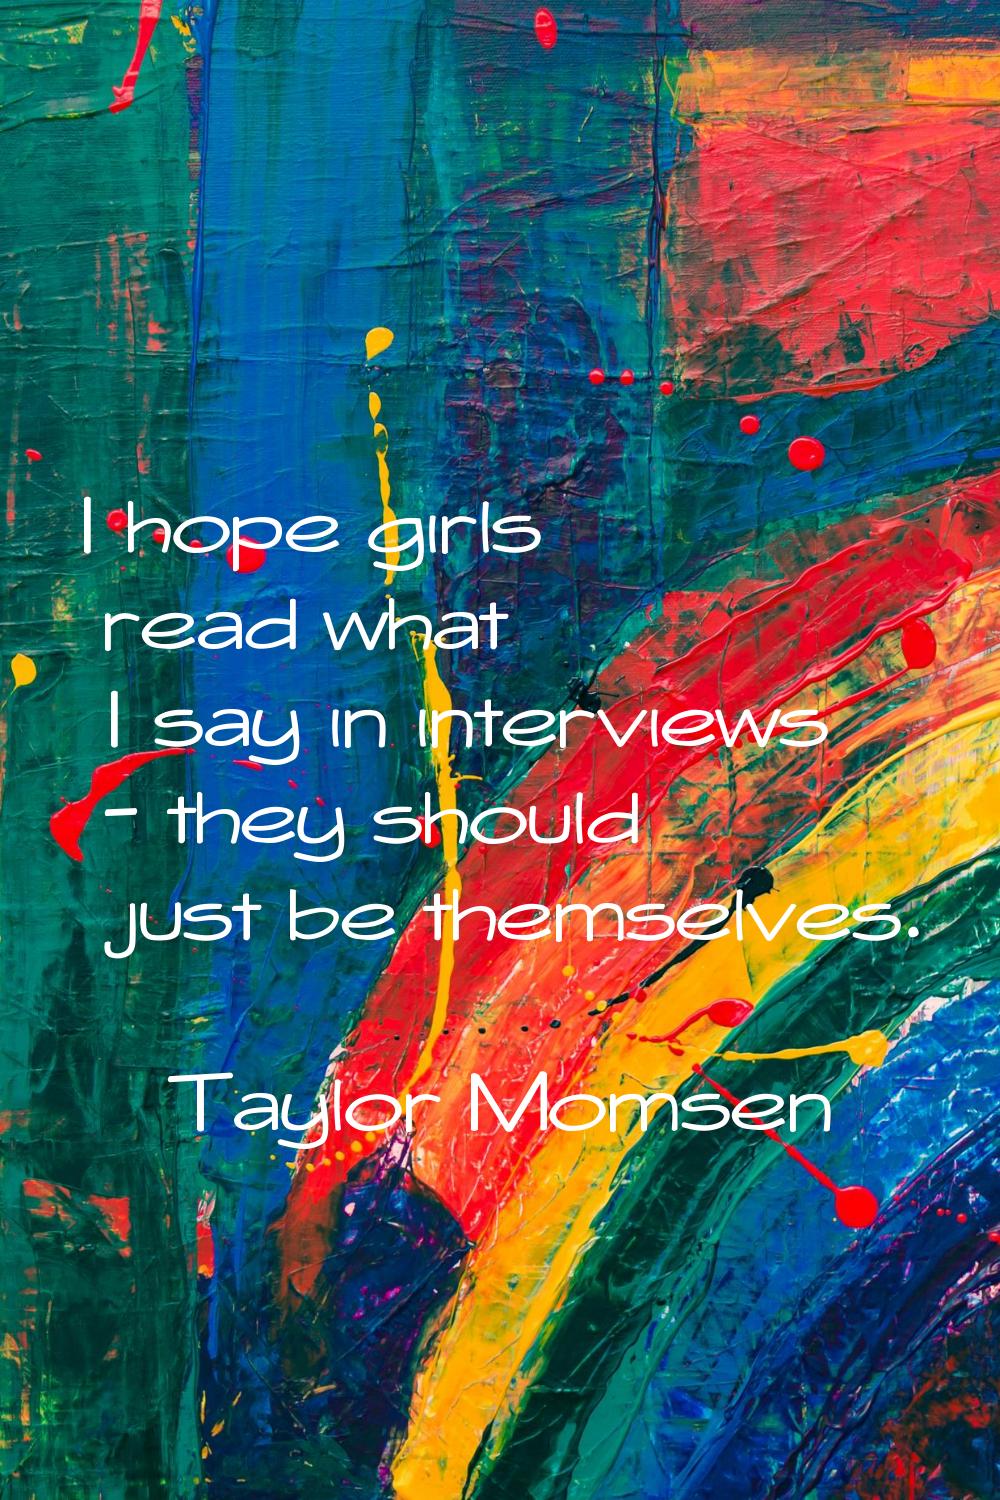 I hope girls read what I say in interviews - they should just be themselves.